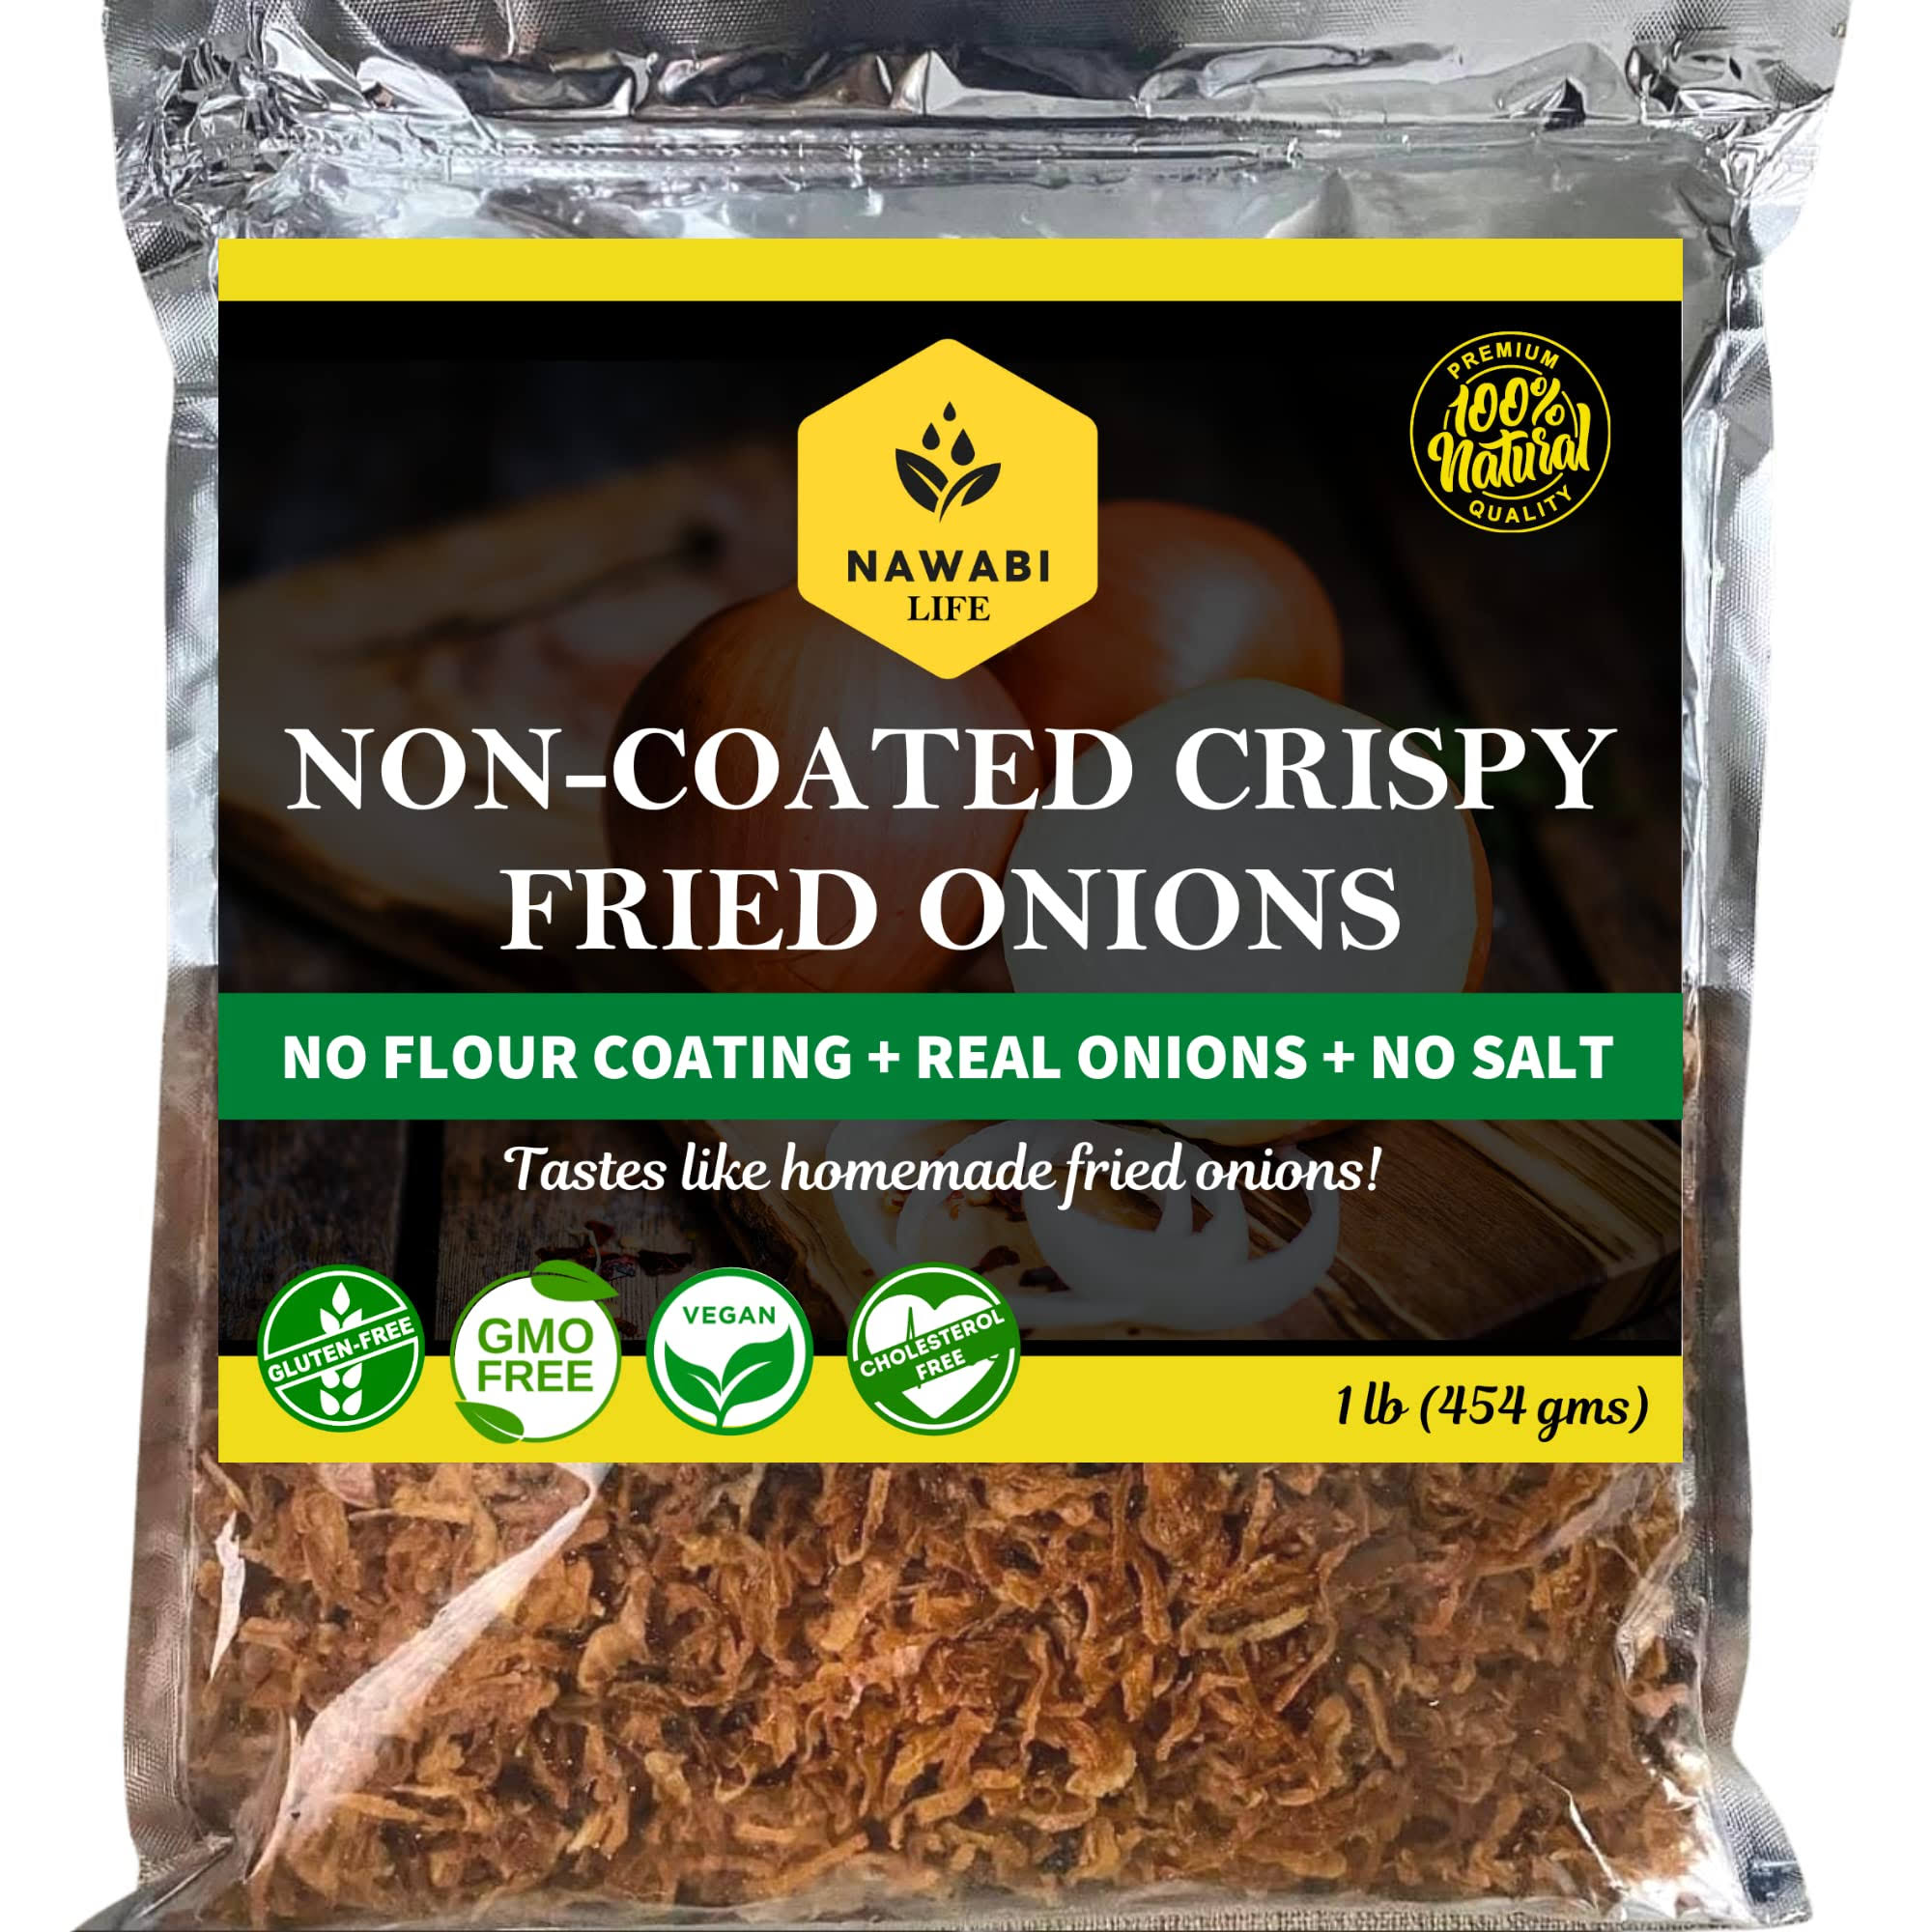 Non-Coated Crispy Fried Onions - Healthiest Fried Onions, Gluten Free,